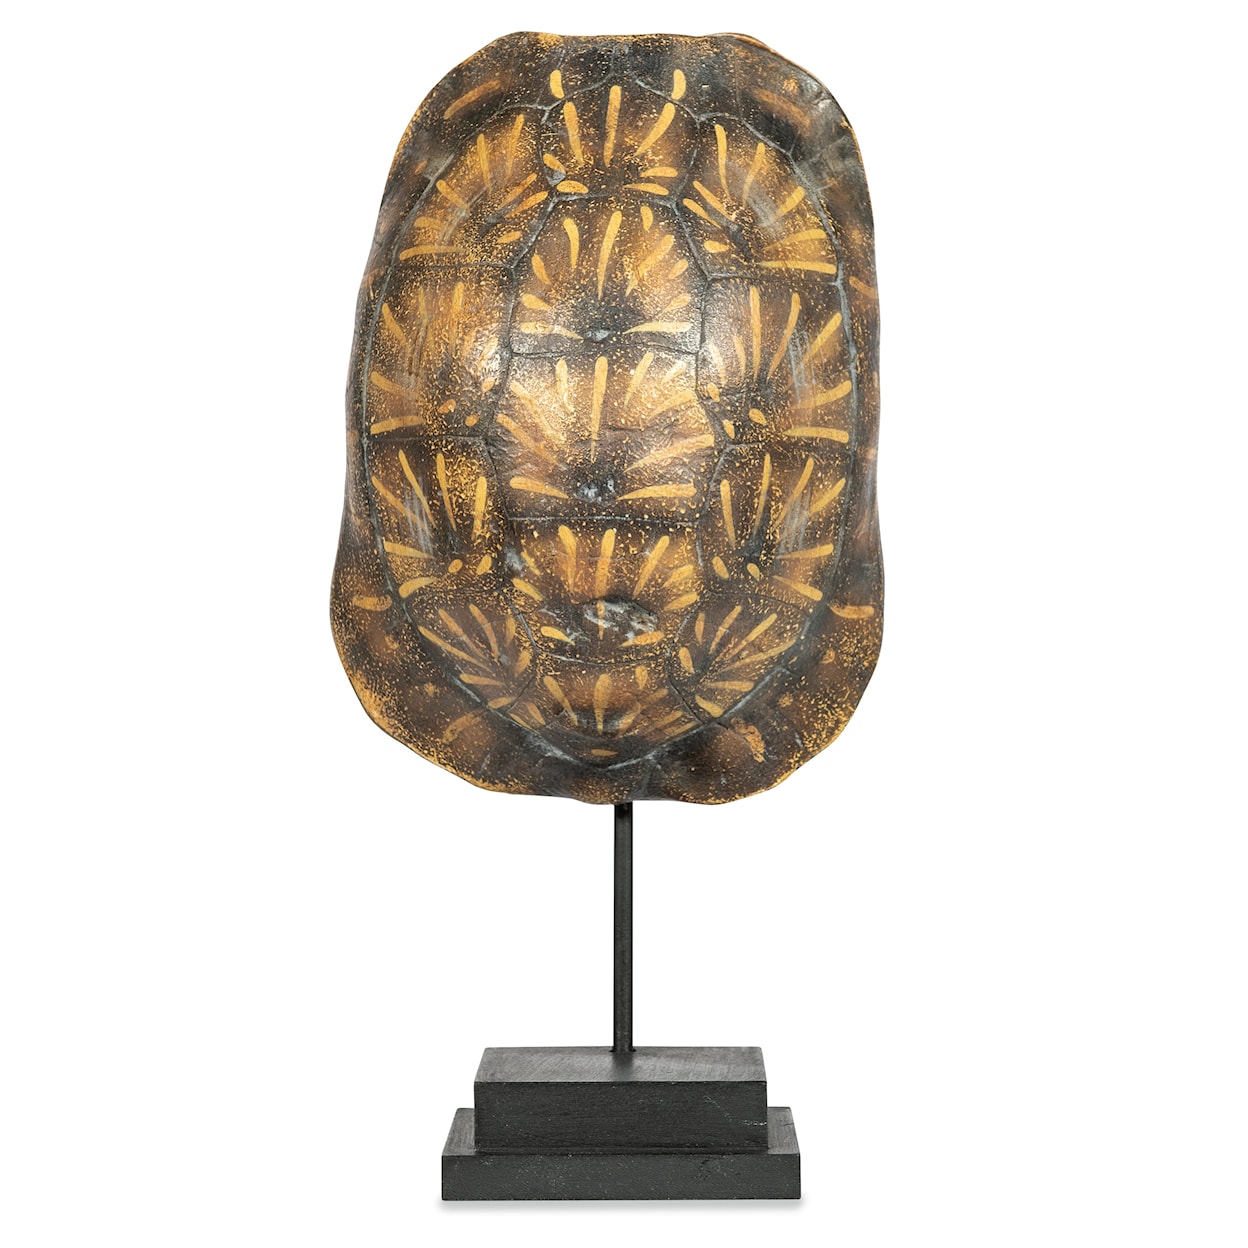 BOBO Intriguing Objects BOBO Intriguing Objects Faux Ornate Box Tortoise Shell on Stand